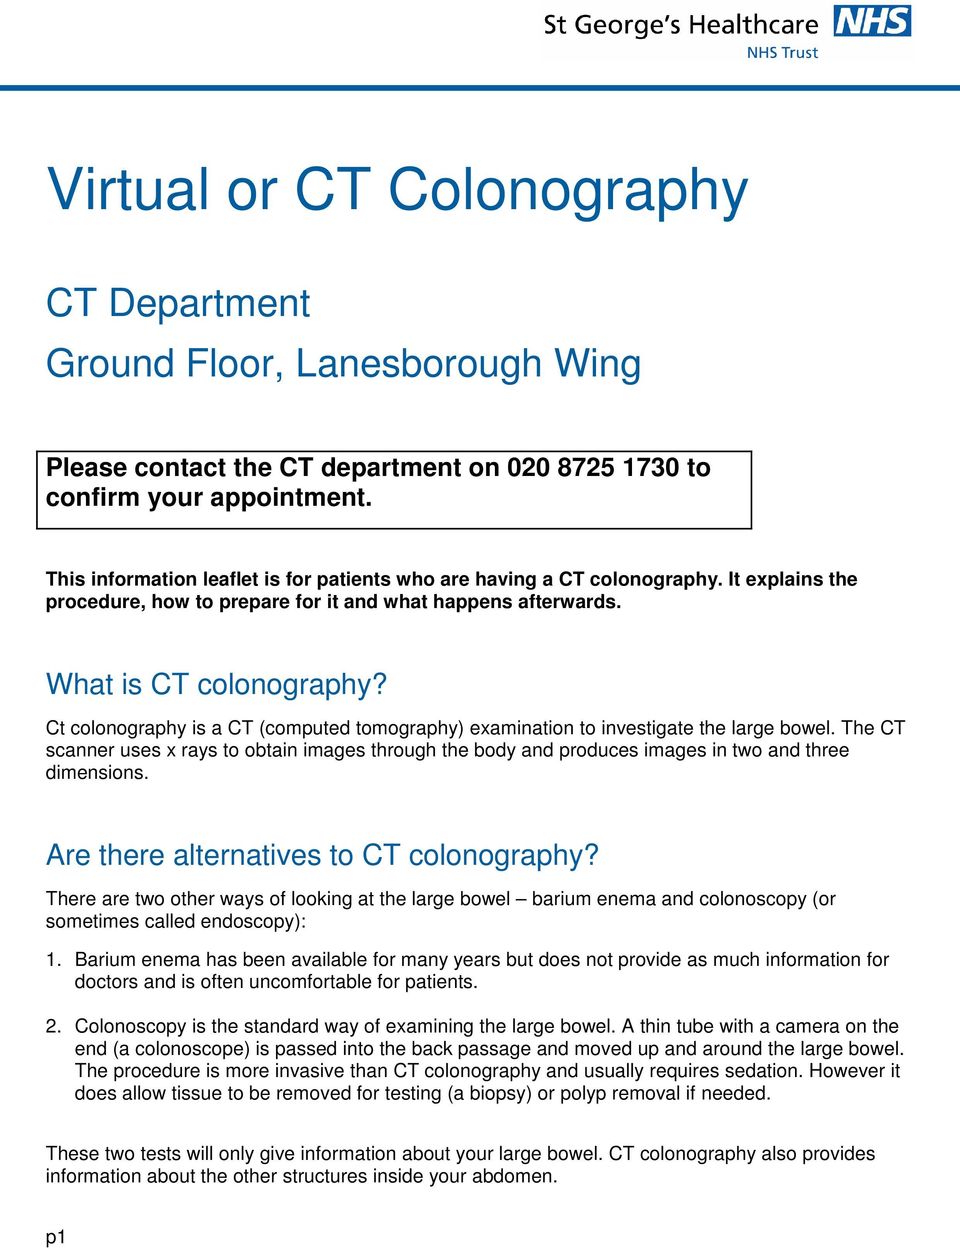 Ct colonography is a CT (computed tomography) examination to investigate the large bowel. The CT scanner uses x rays to obtain images through the body and produces images in two and three dimensions.